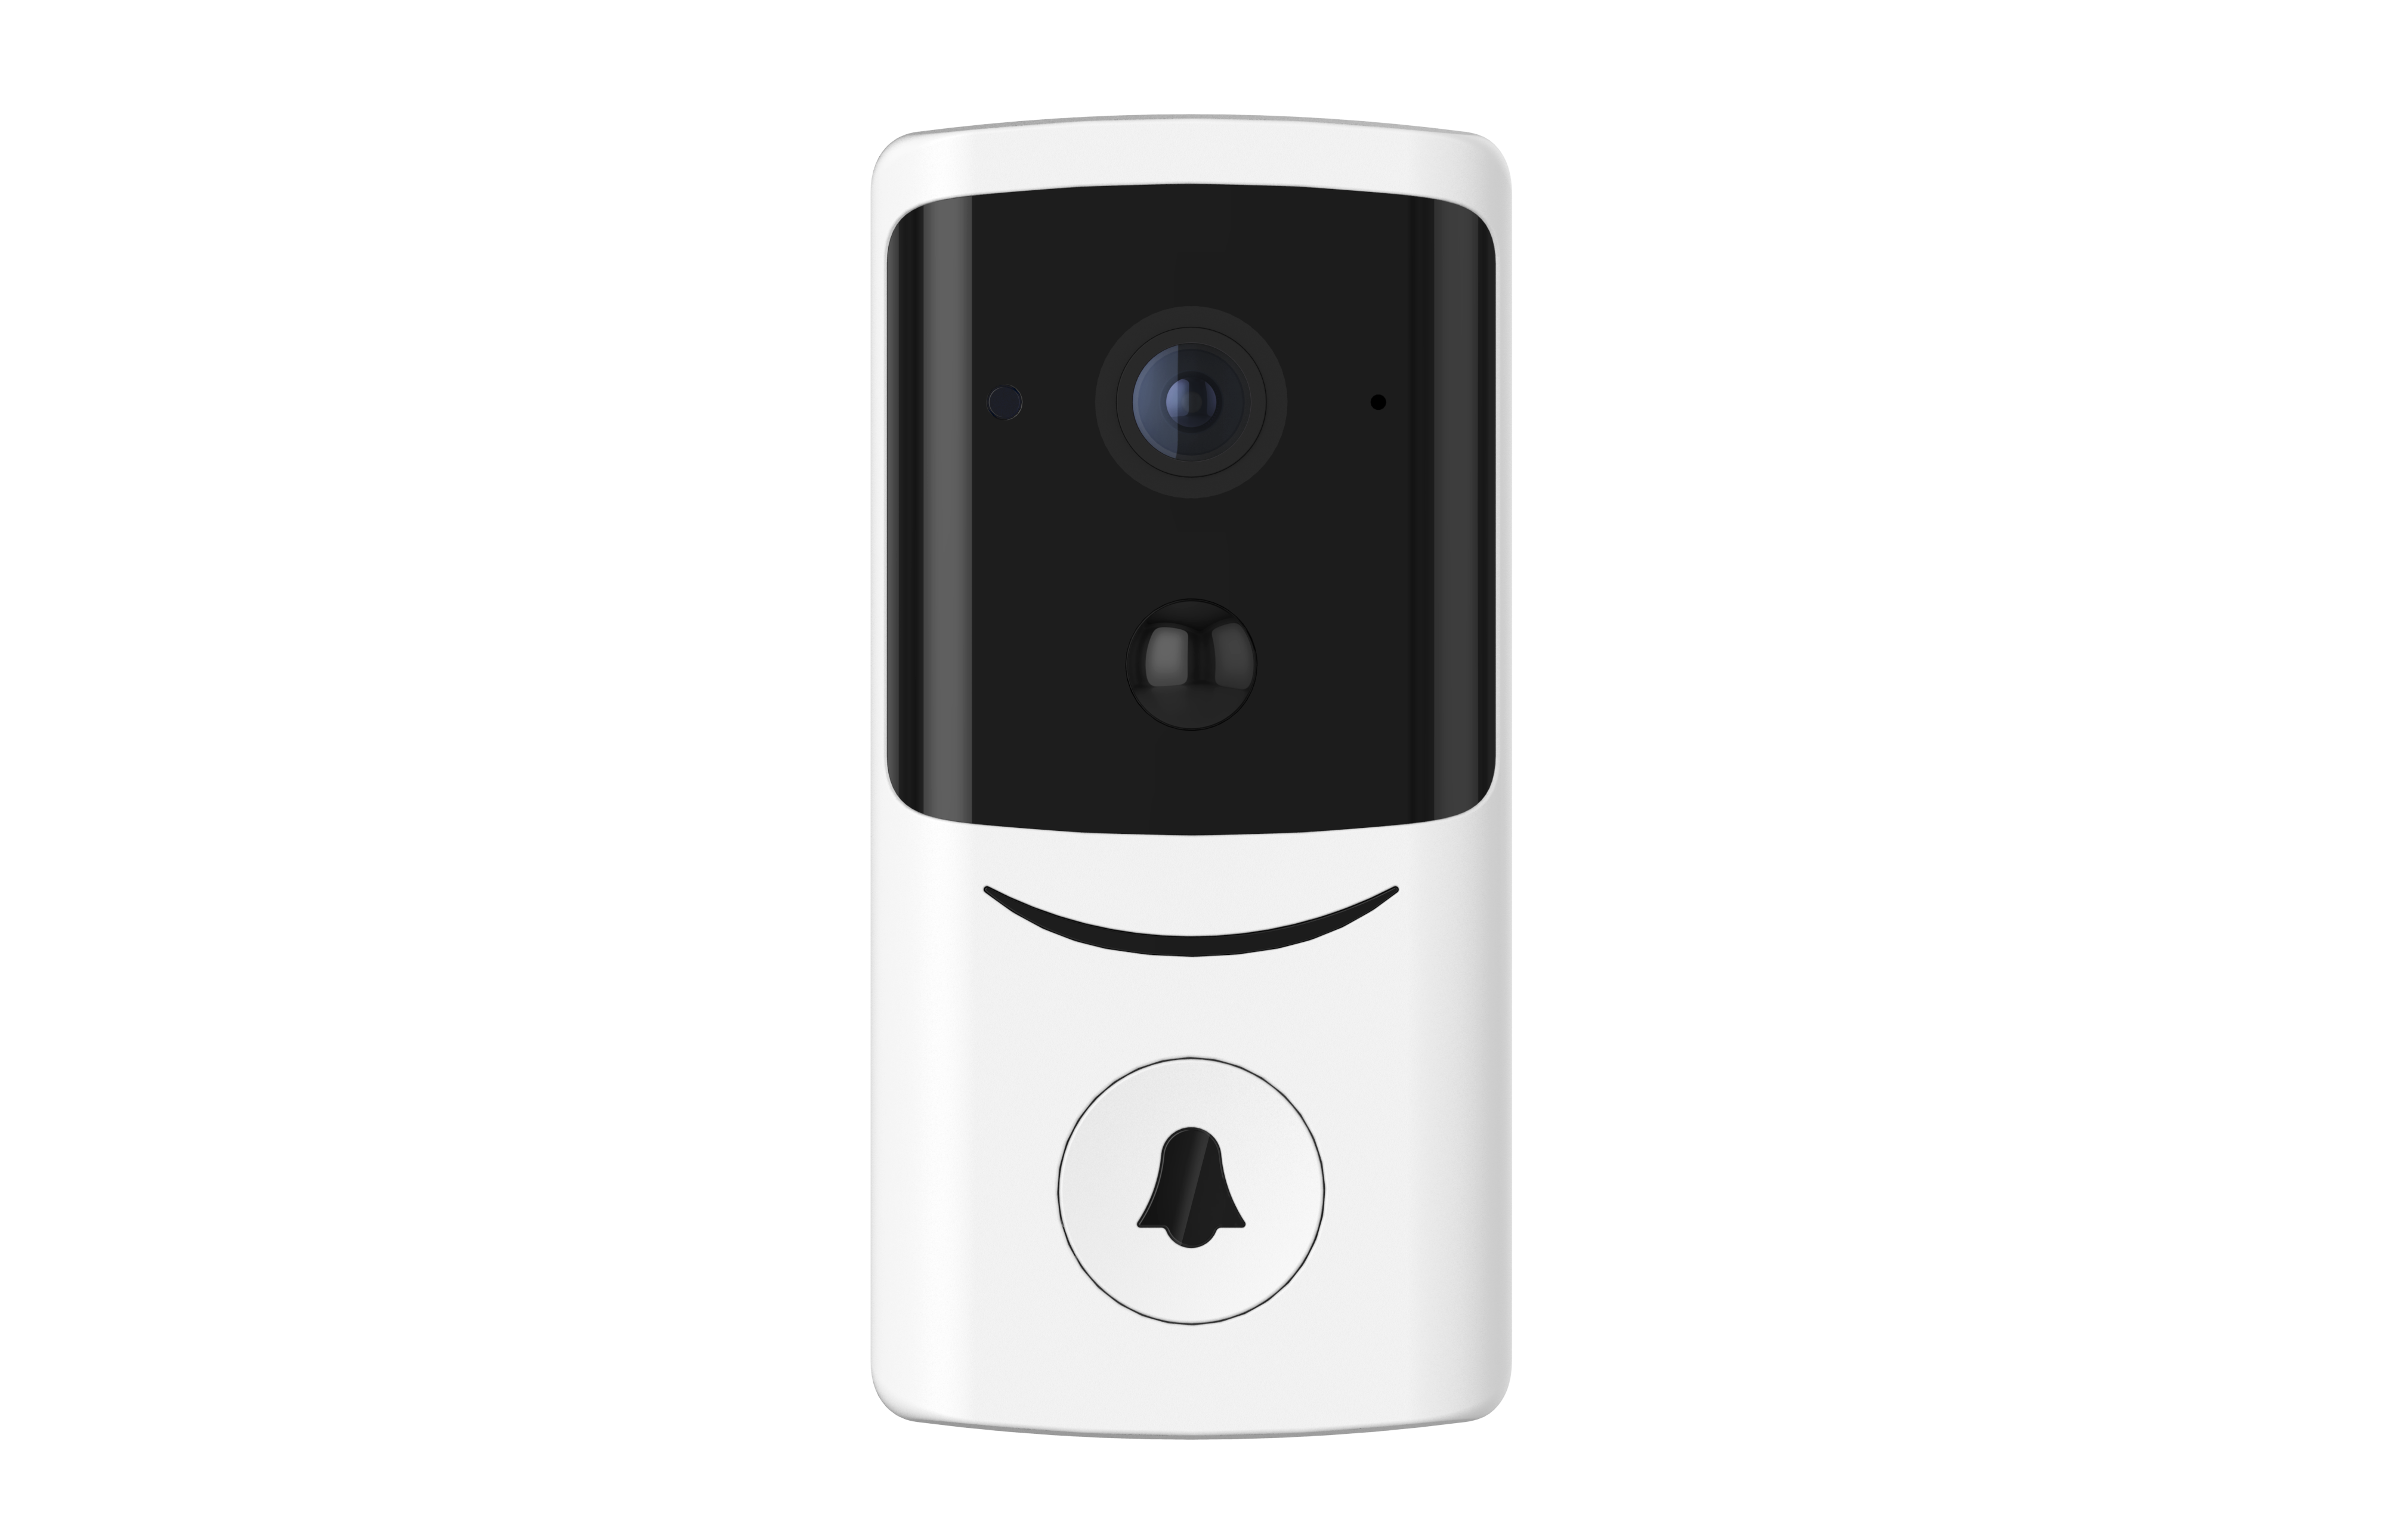 Can the doorbell camera be seen at night?